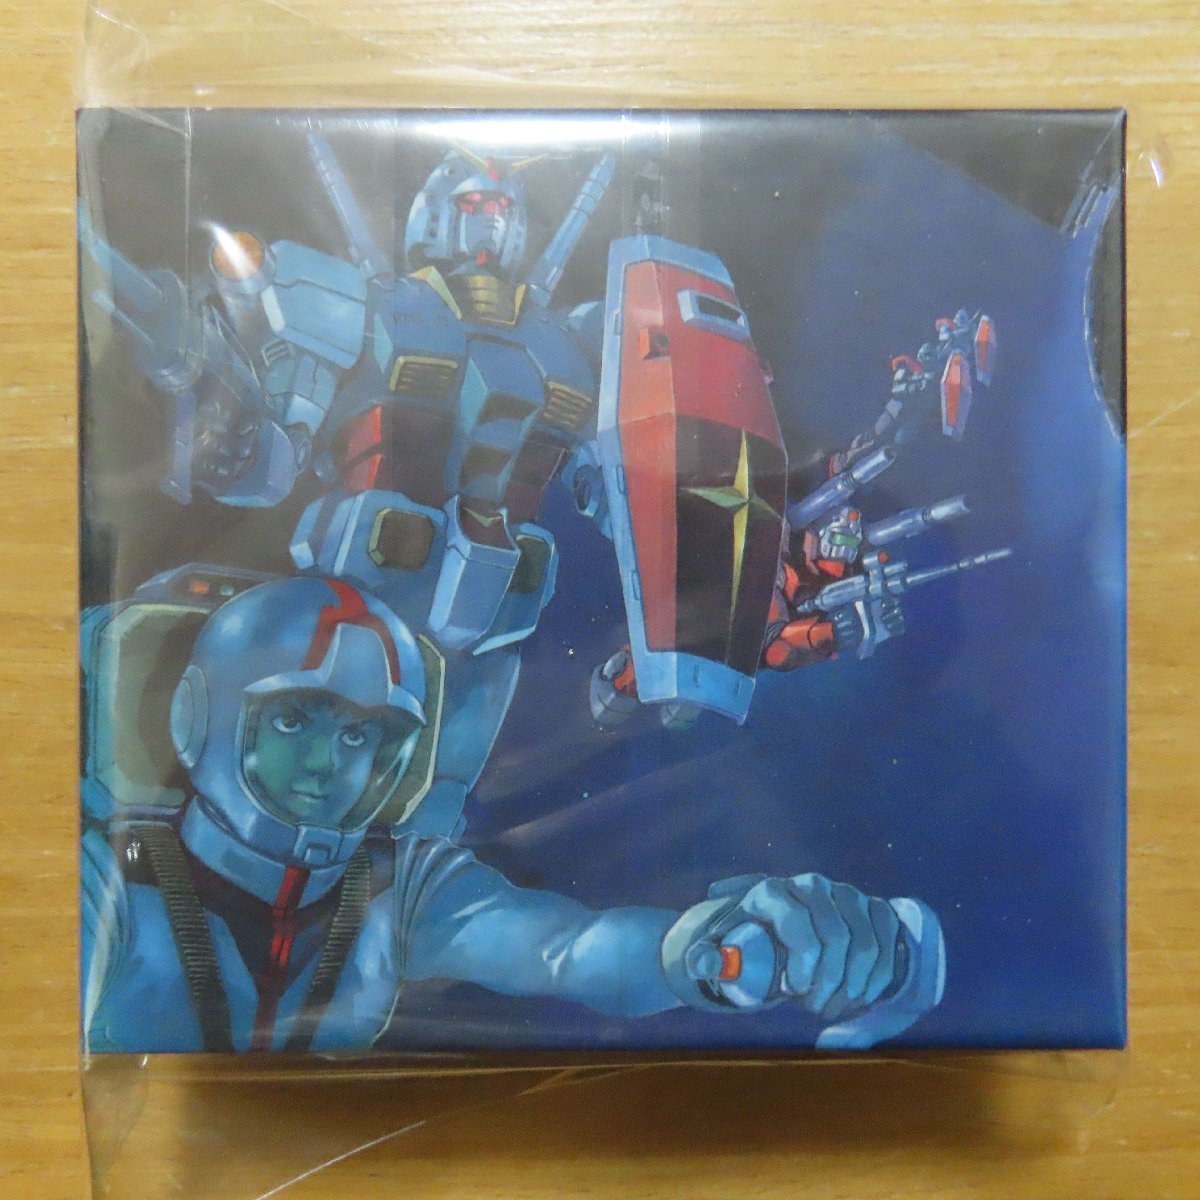 4988003290009;[3CD+4CDBOX/ the first times limitation storage BOX attaching / rare!] anime * soundtrack / Mobile Suit Gundam theater &TV version total music compilation 